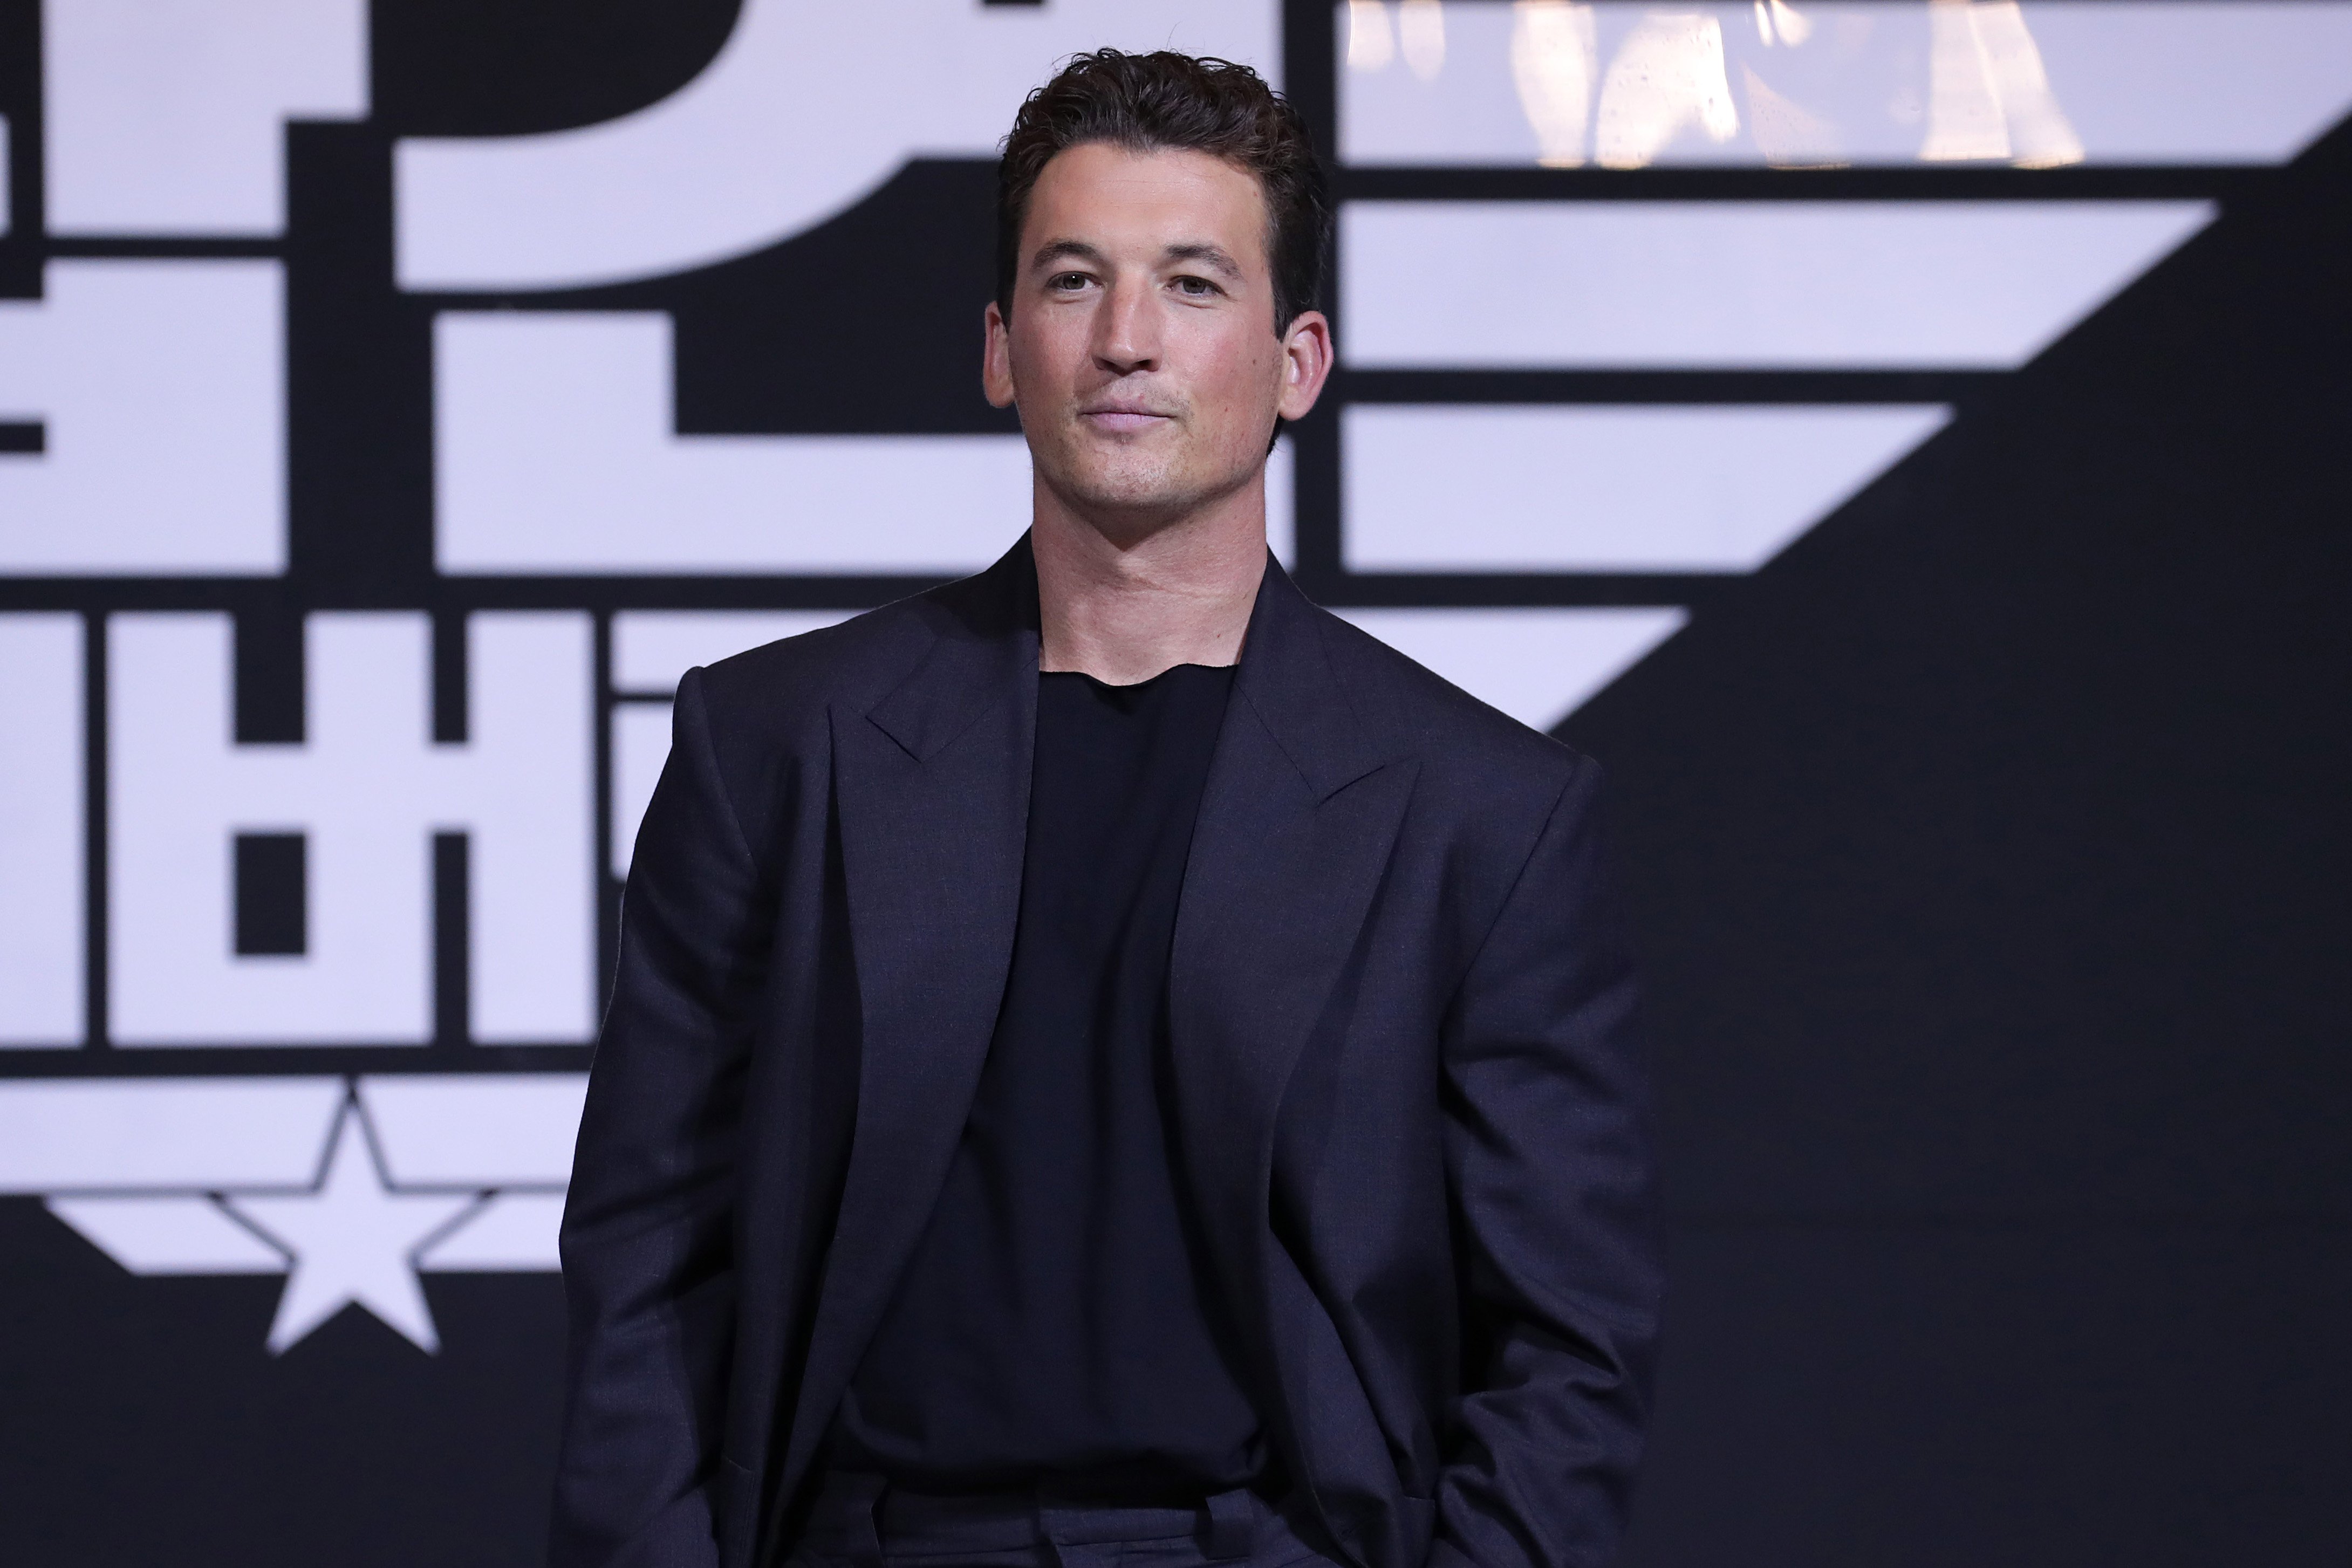 Miles Teller attends the press conference for Top Gun: Maverick in South Korea